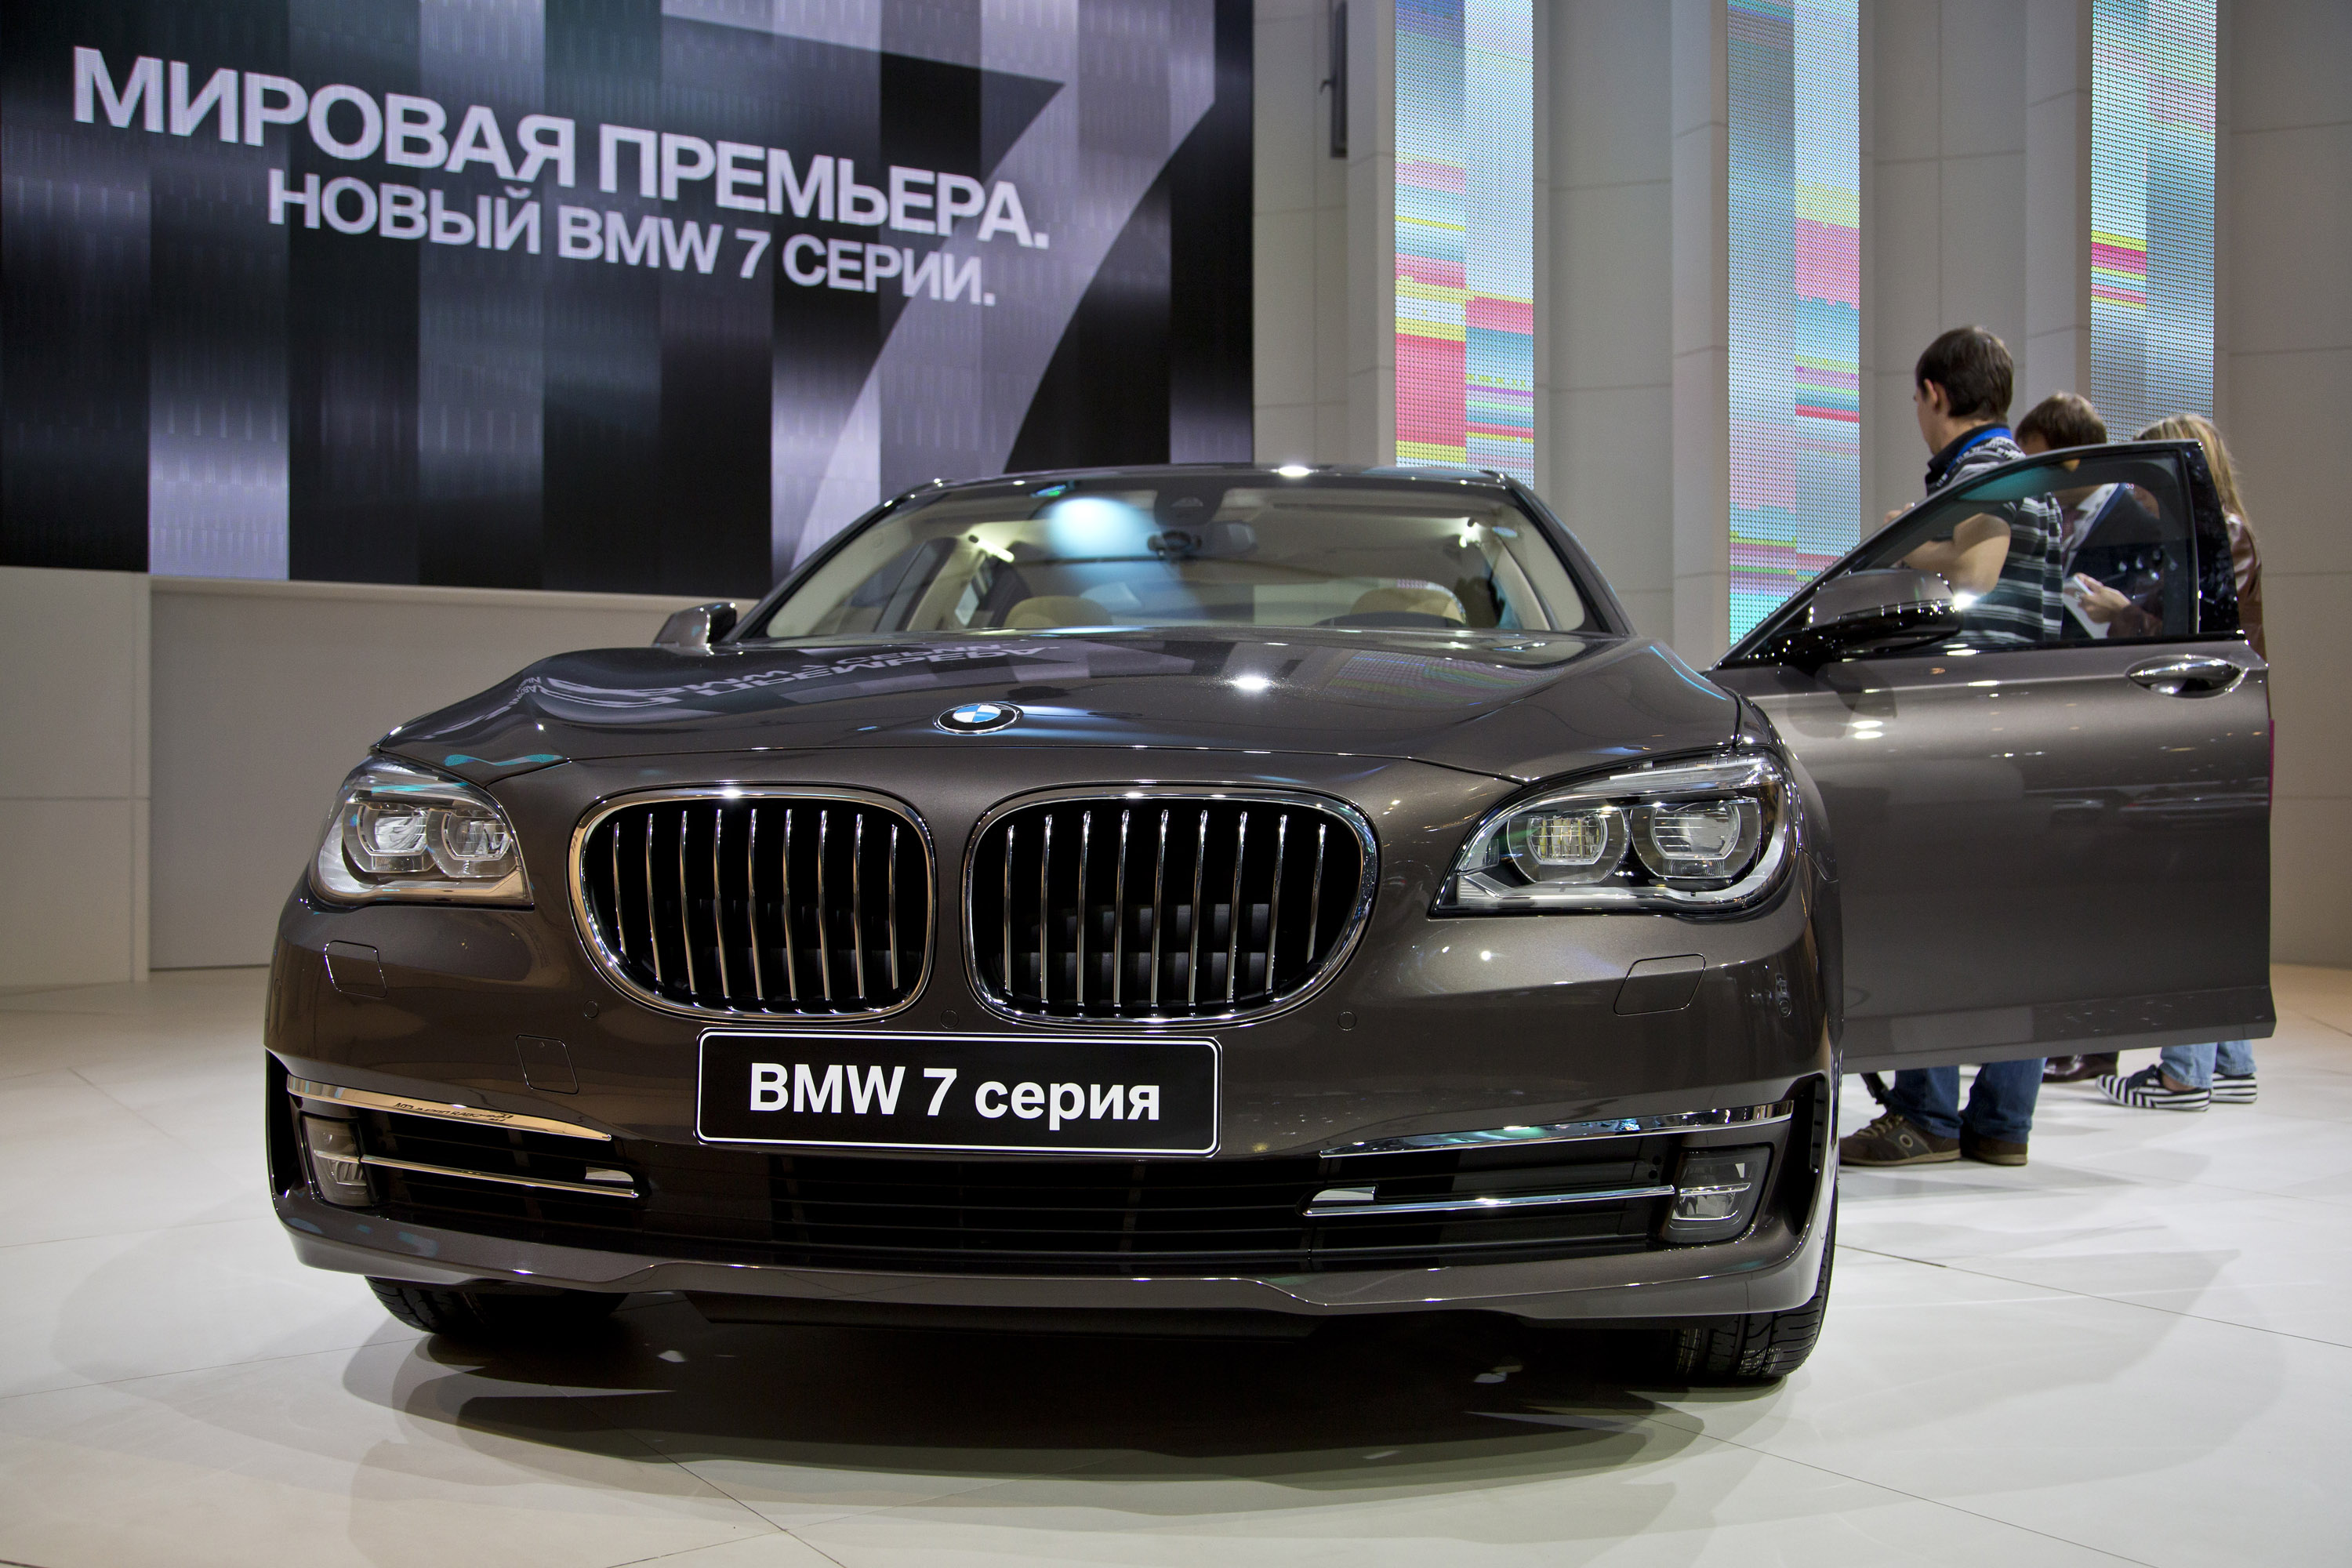 BMW 7-Series Moscow